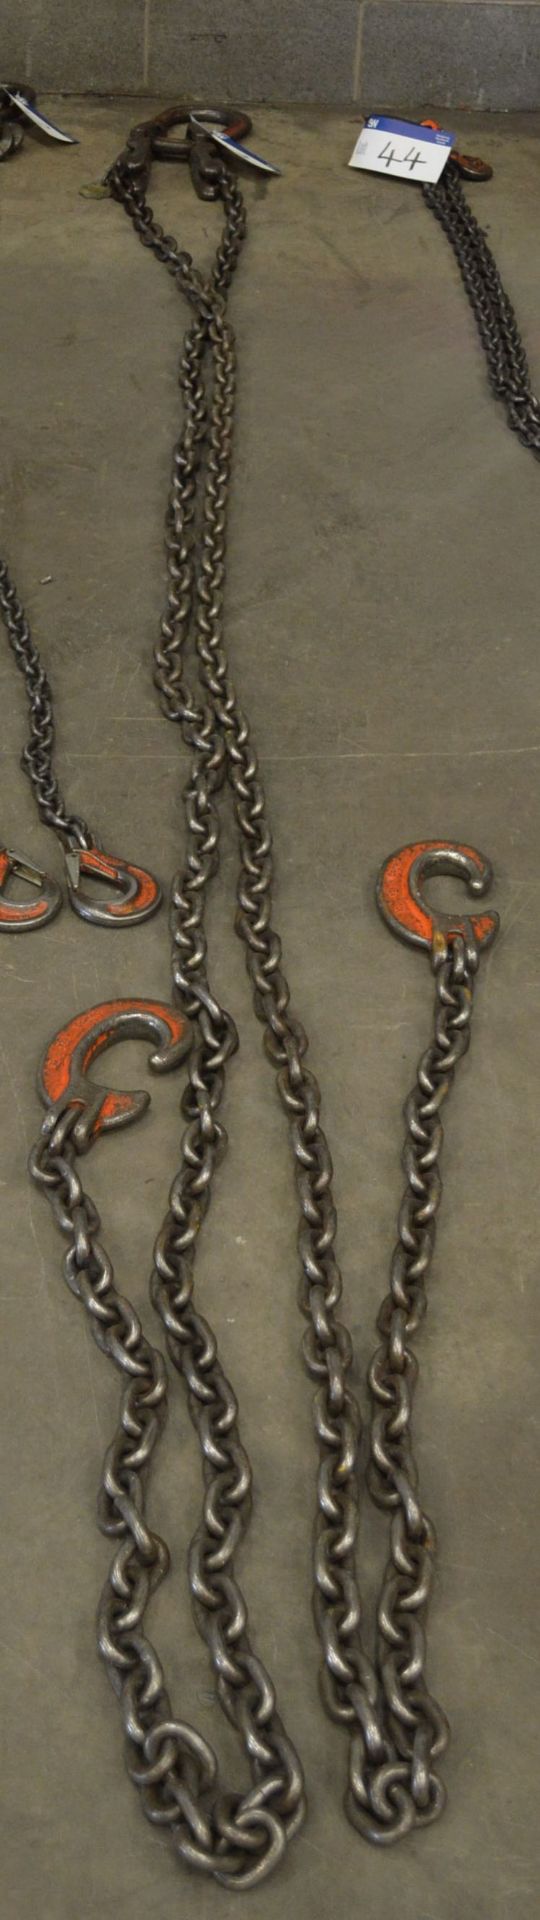 Pewag Two Leg Chain Sling, approx. 5m long, with tensioners